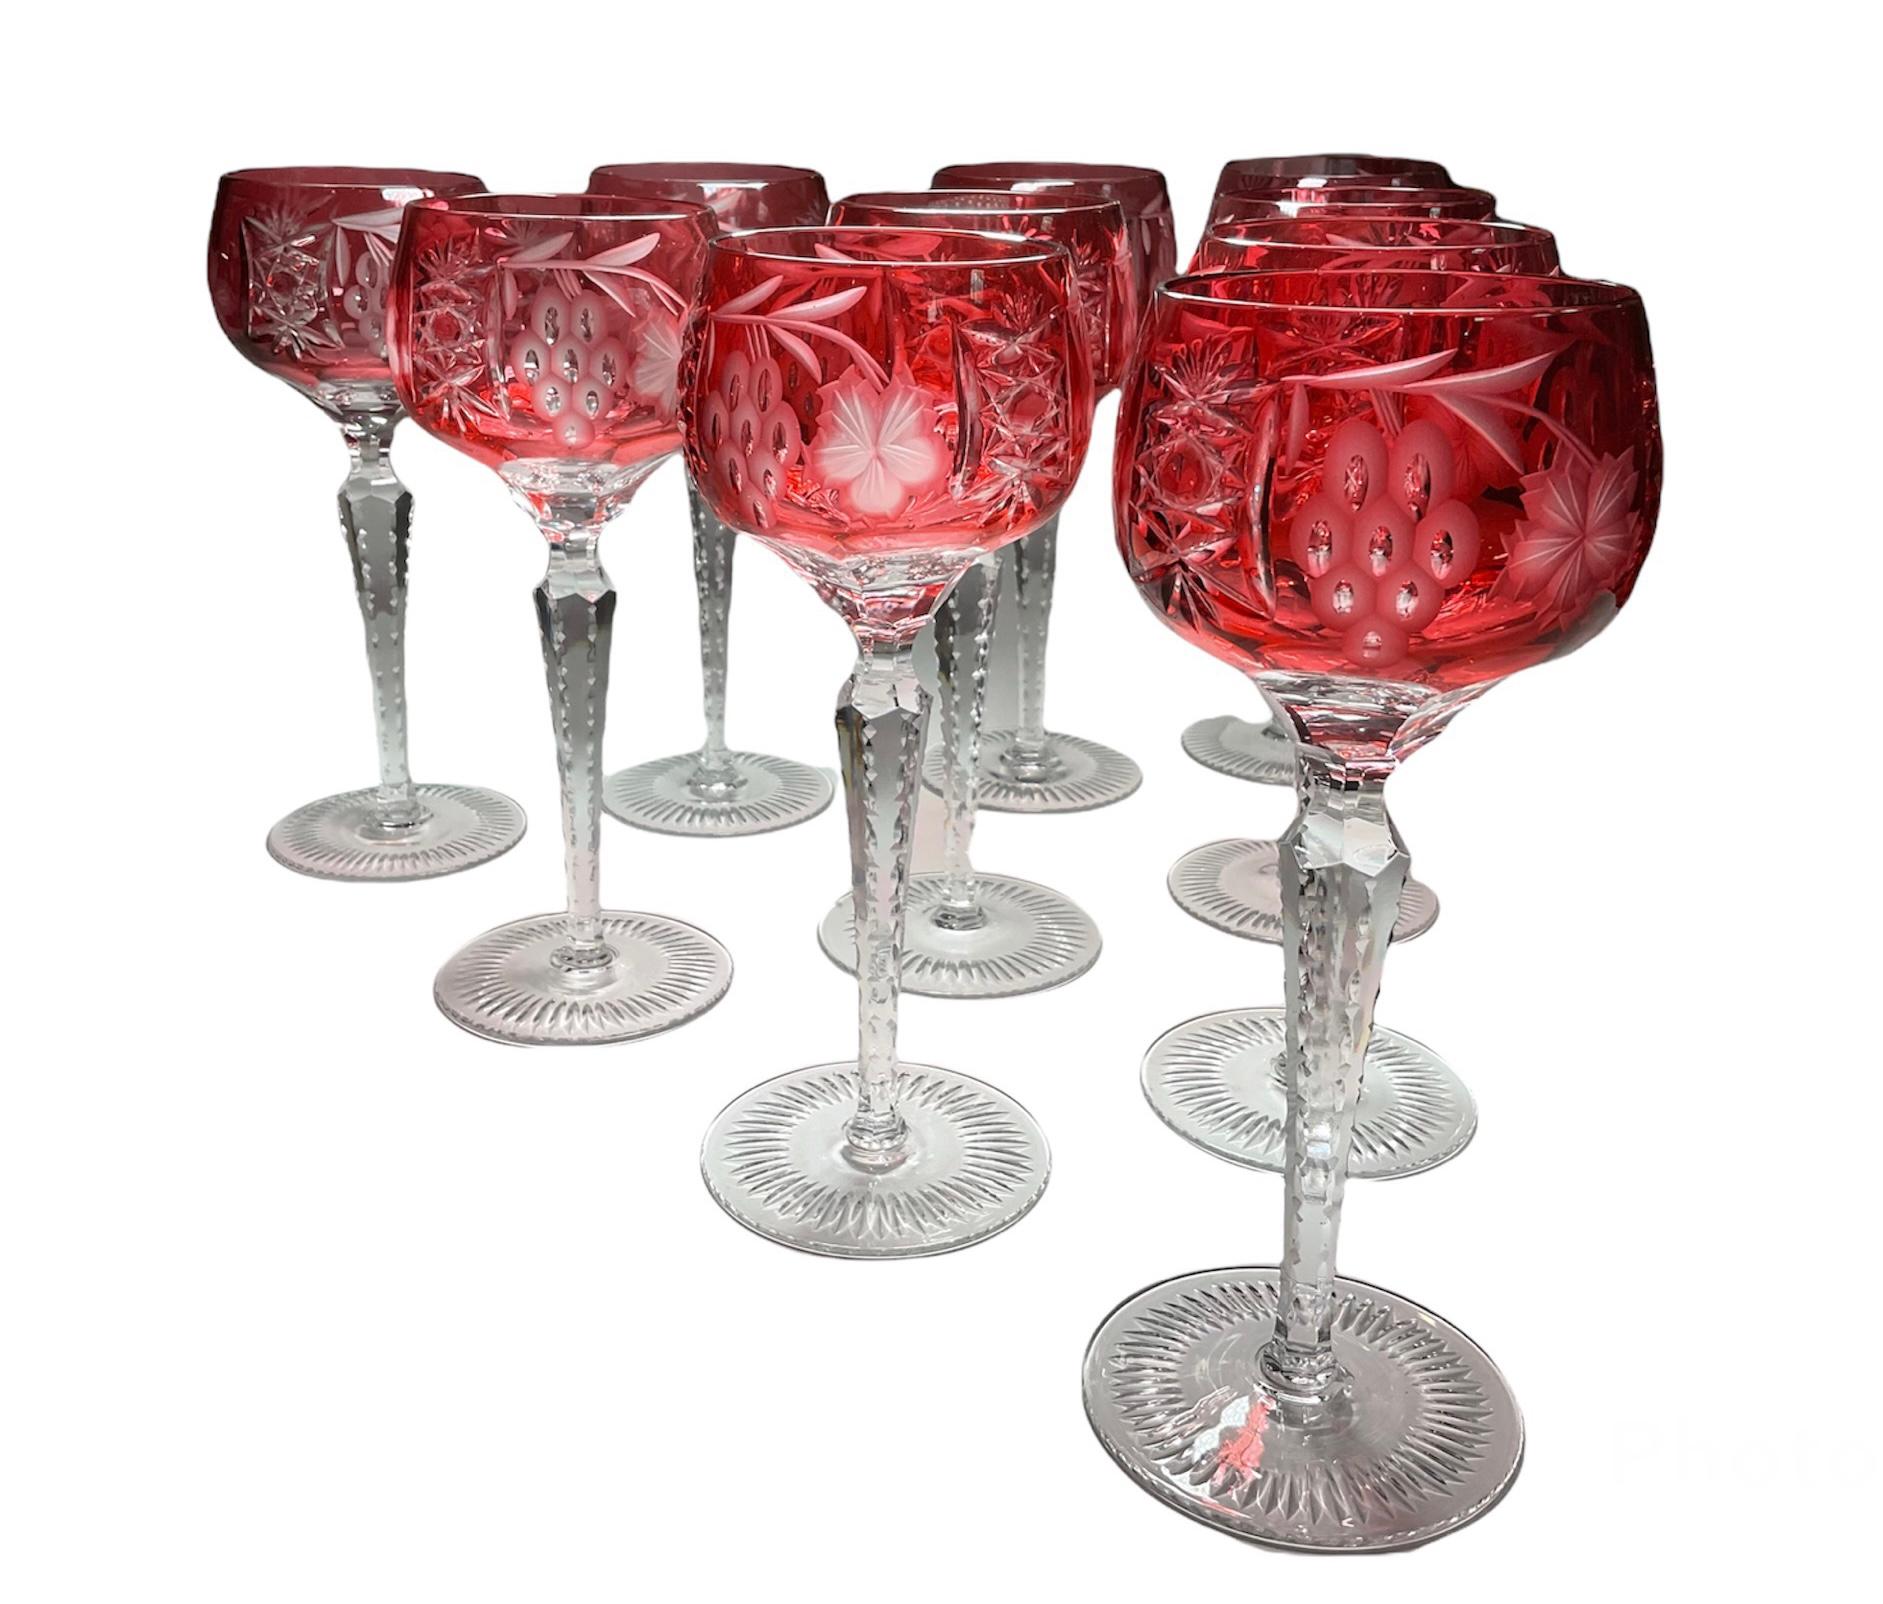 This is a set of ten cranberry color to clear wine cut crystal glasses. Their round bowls are decorated with etched frosted grapevine branches and clear grapes bunches alternated by cut crystal patterns of fans and hobstars. Below the bowls, there